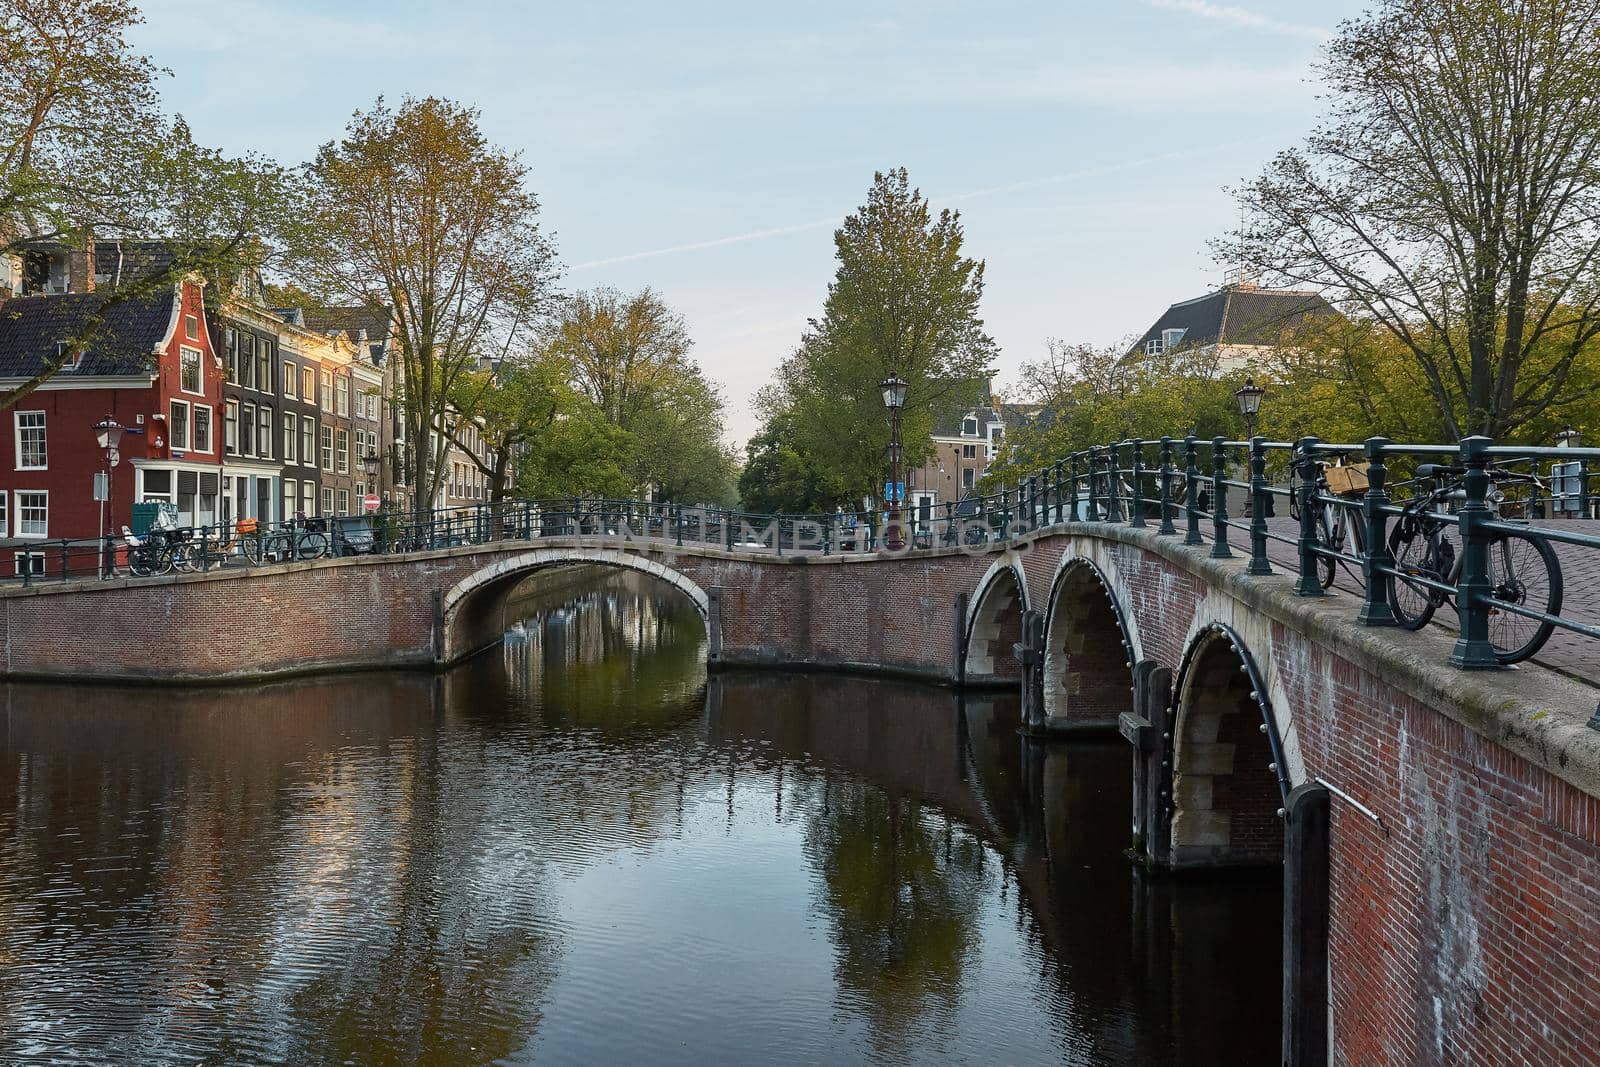 One of the many bridges over a canal in Amsterdam Netherlands by wondry